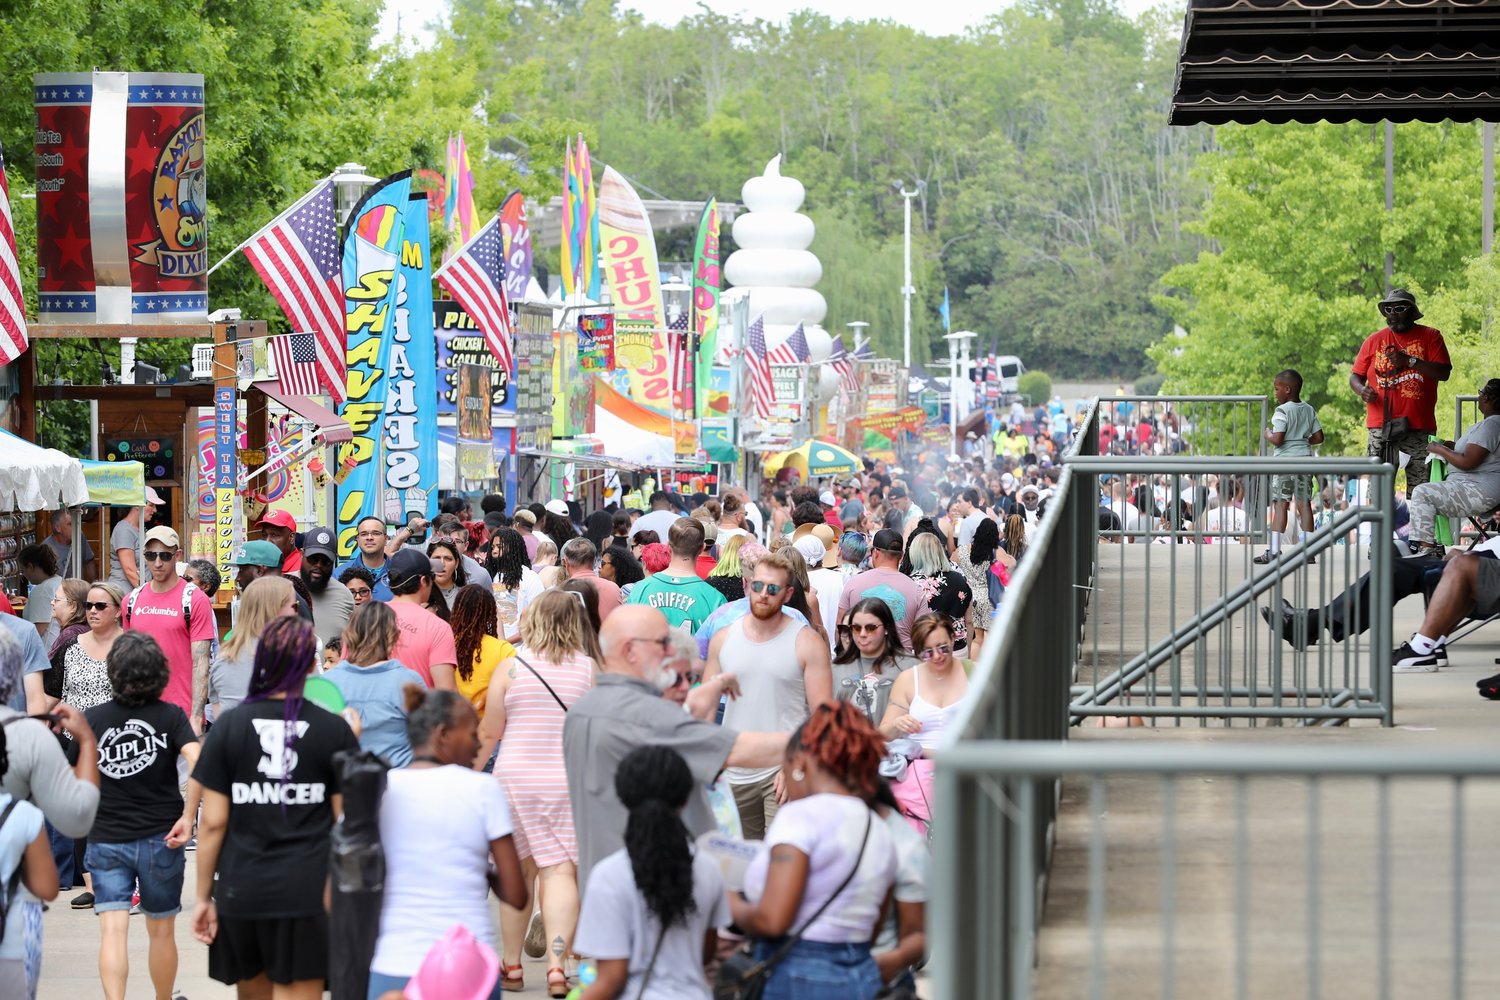 Food vendors line the promenade leading to Festival Park during the 40th Fayetteville Dogwood Festival on April 23. The mayor and members of the City Council talked with the festival's executive director about having more diversity in the festival's entertainment.